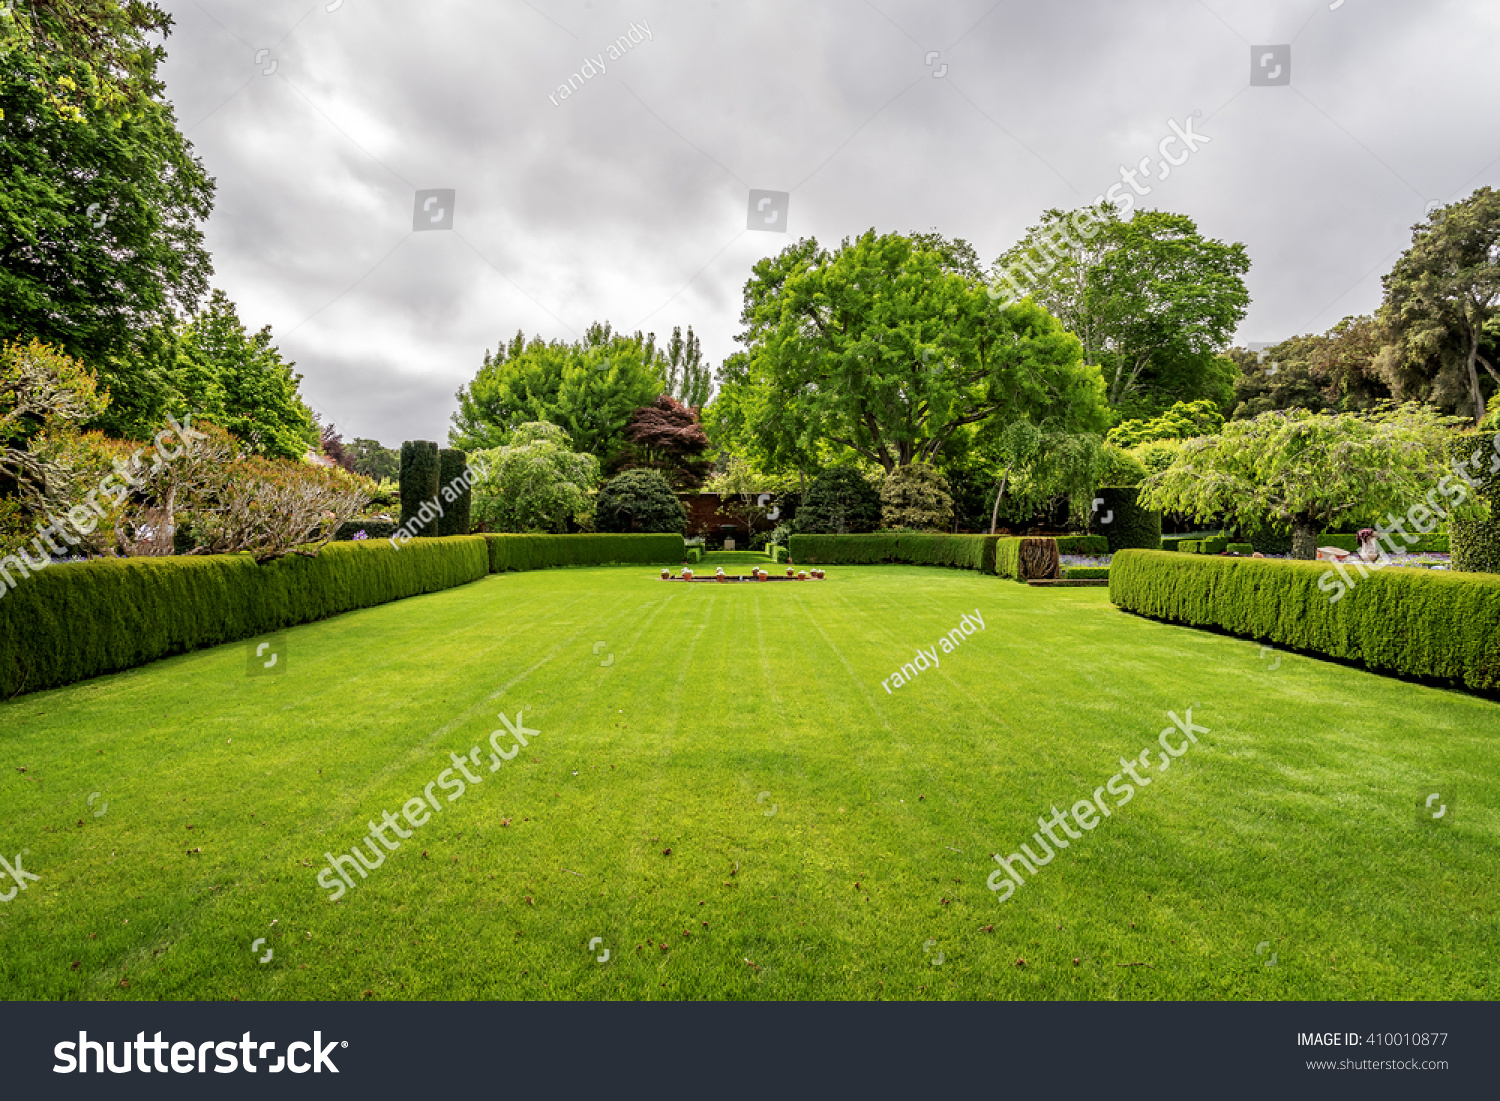 Beautiful English style garden with hedges, & symmetrical type design, with a large open green lawn for parties & open air activities. The garden is designed with European flair, class and tradition. #410010877